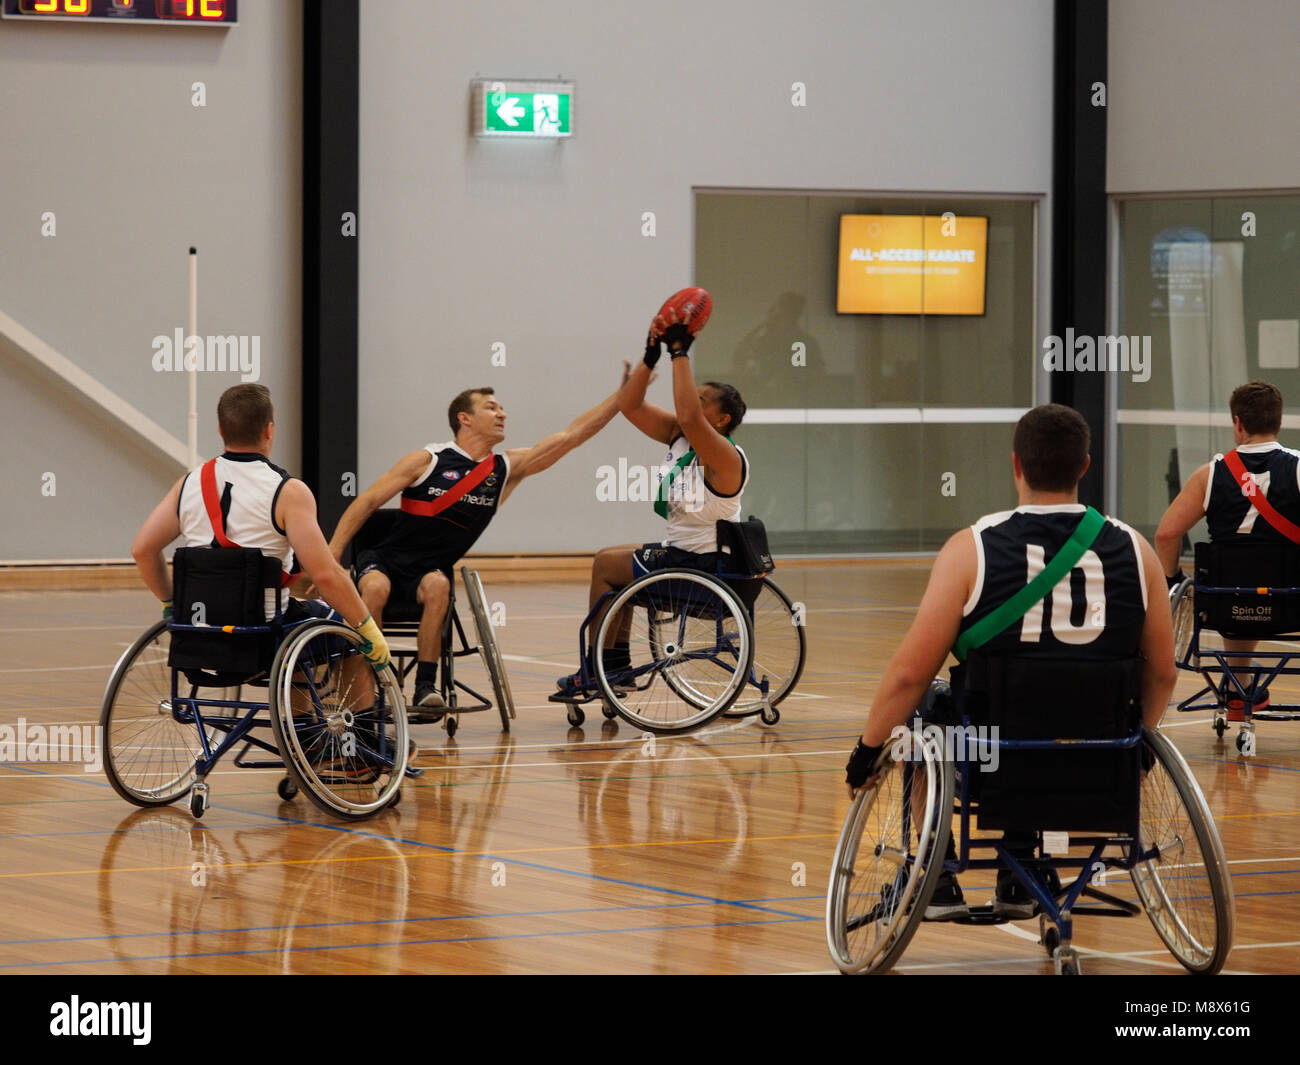 Melbourne, Australia. 21st March 2018. 2018 Wheelchair Aussie Rules National Championship, Australian Defence Force 1 vs Australian Defence Force 2. Credit W Forrester/Alamy Live News Stock Photo